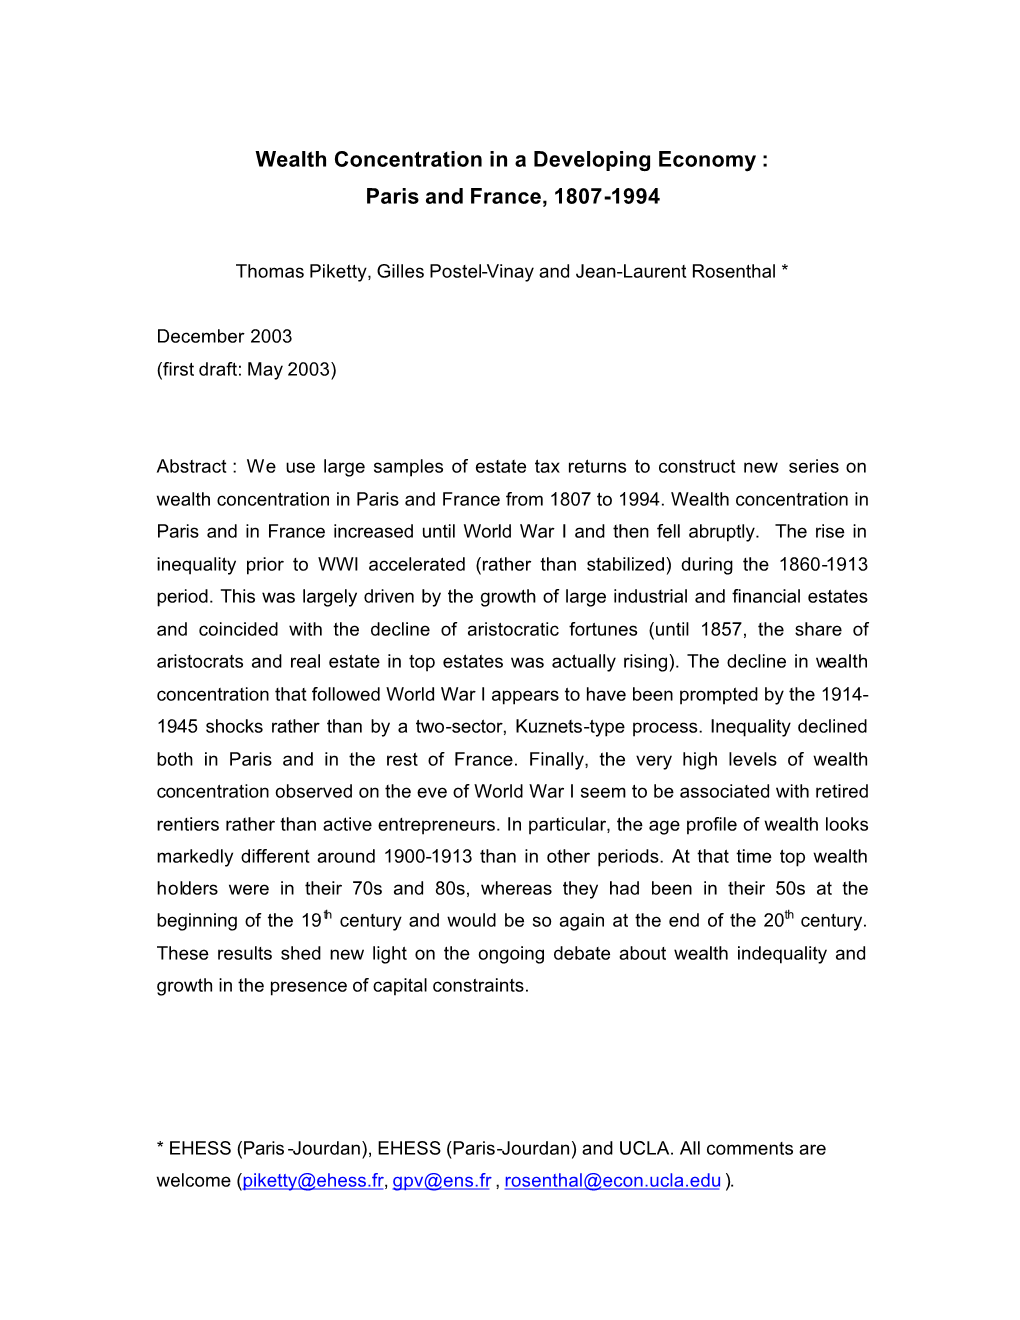 Wealth Concentration in a Developing Economy : Paris and France, 1807-1994